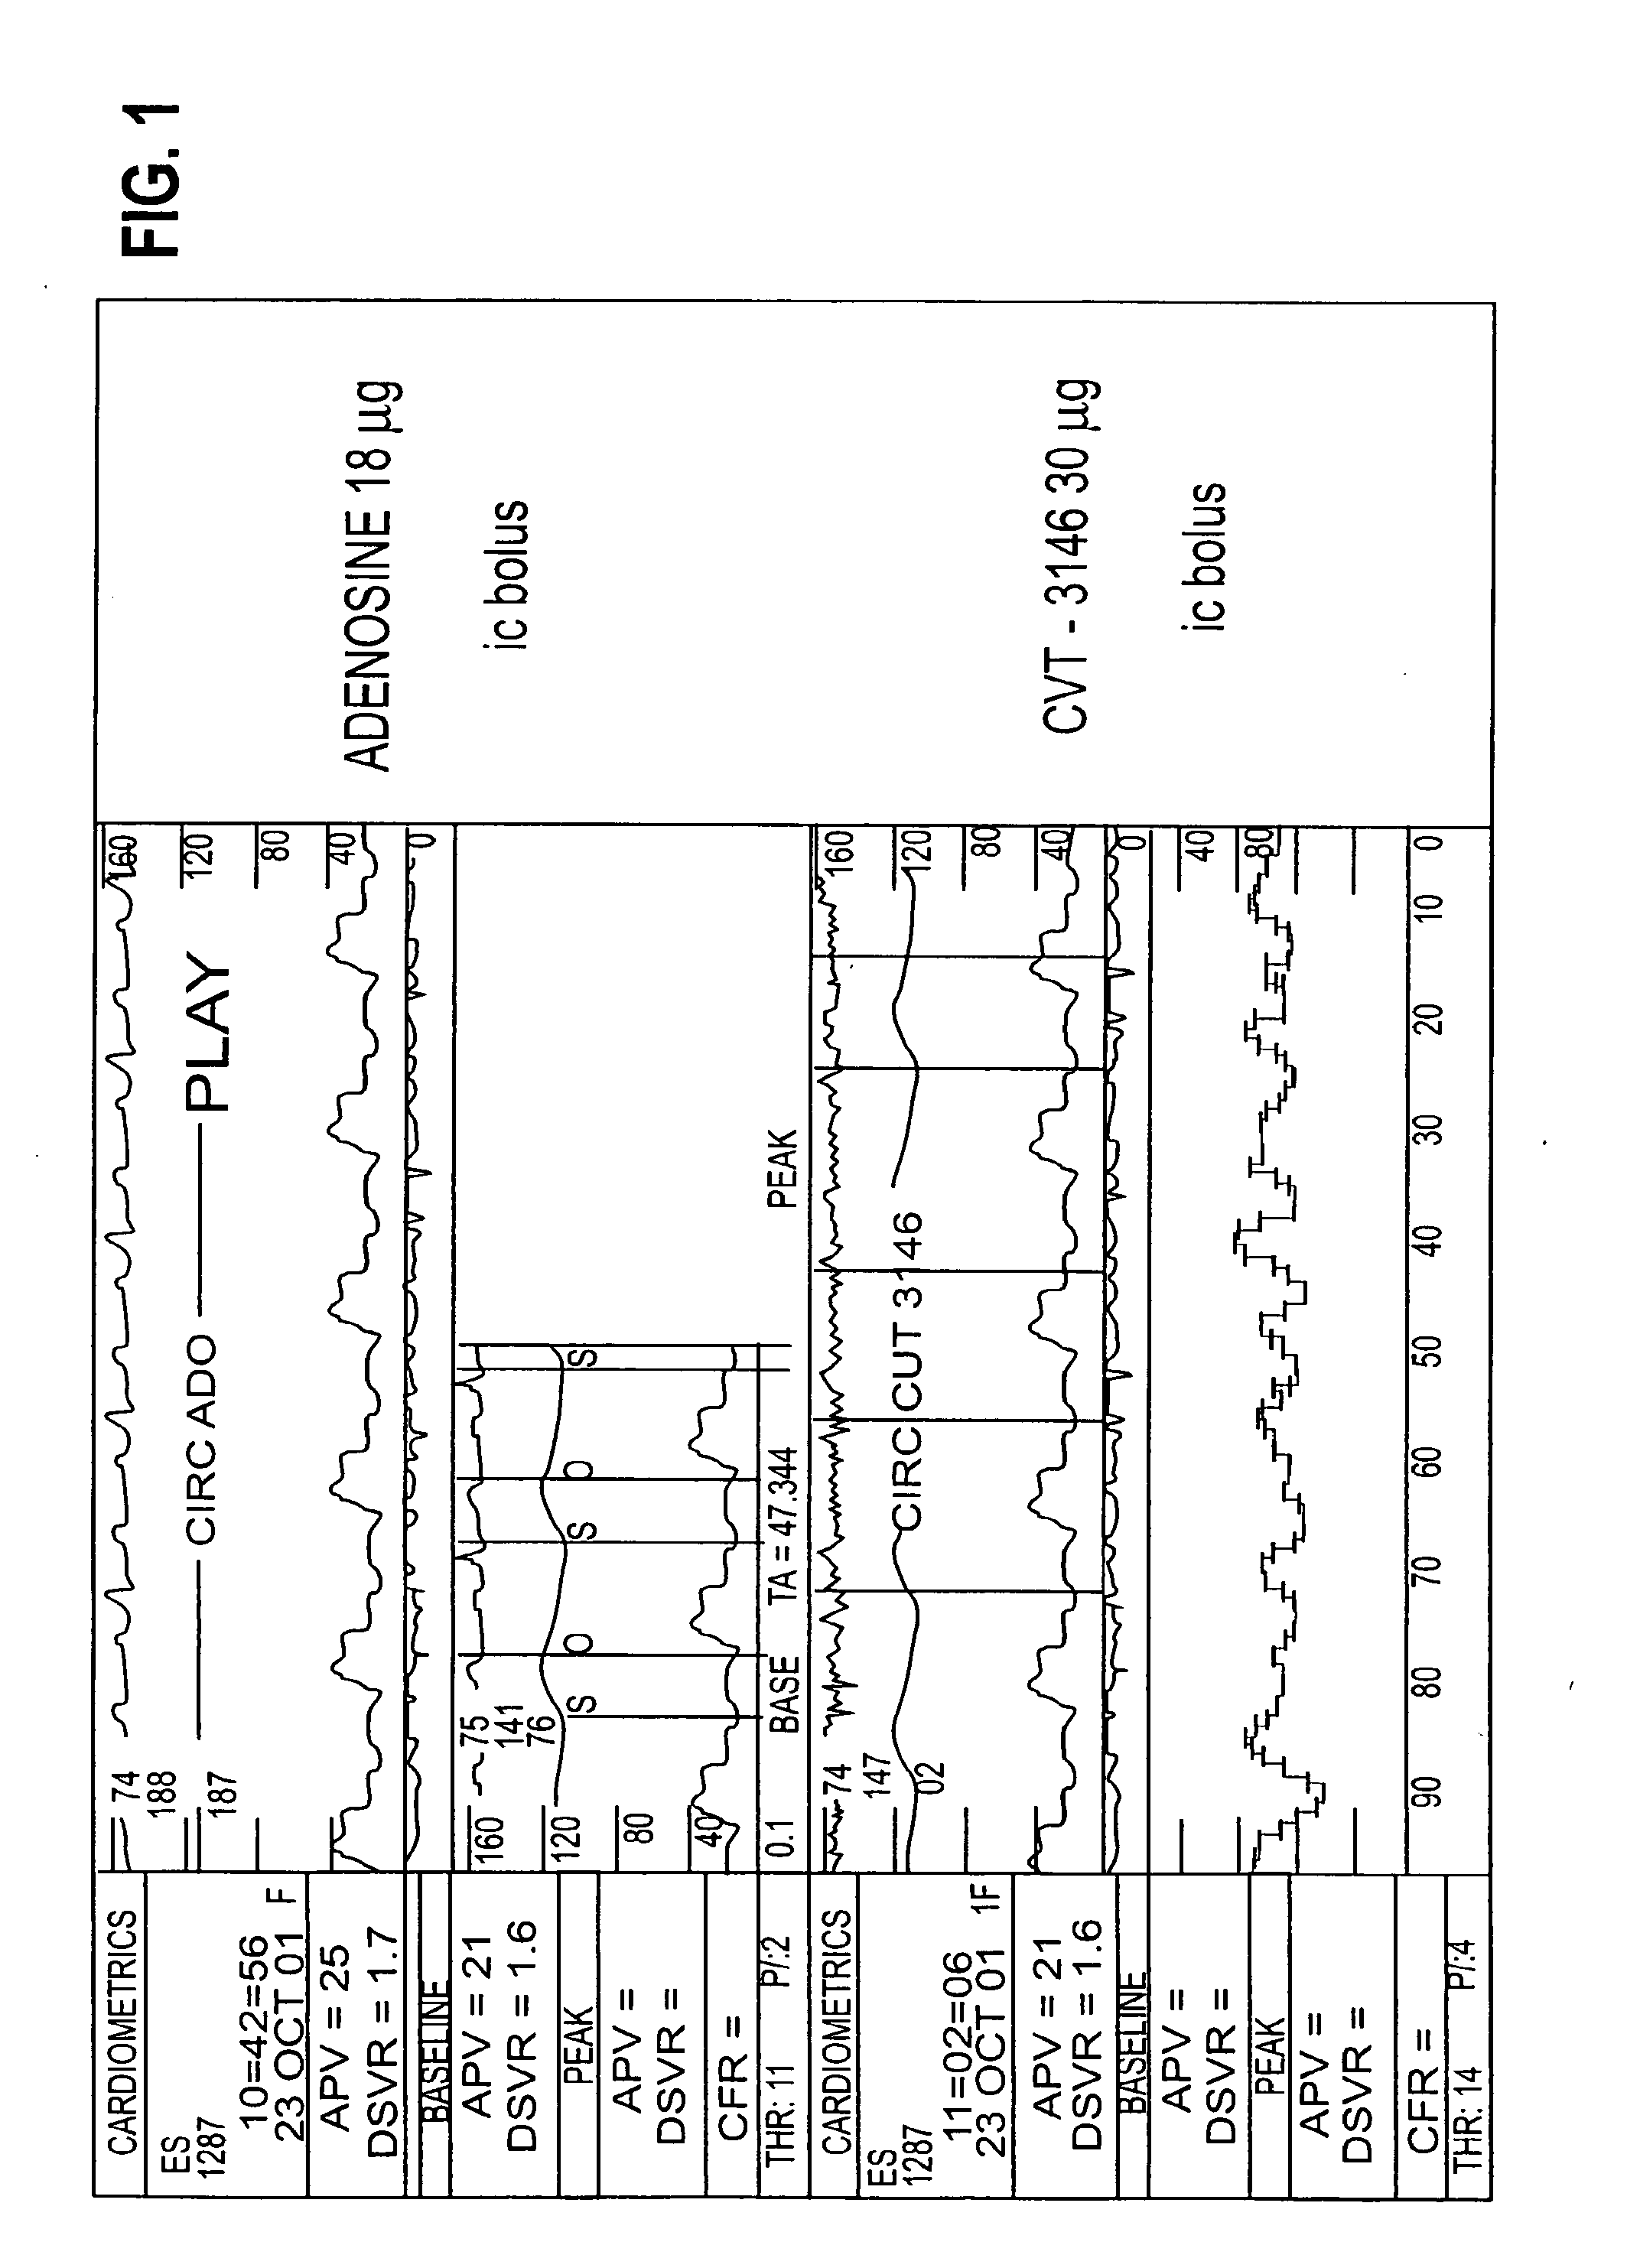 Myocardial perfusion imaging methods and compositions